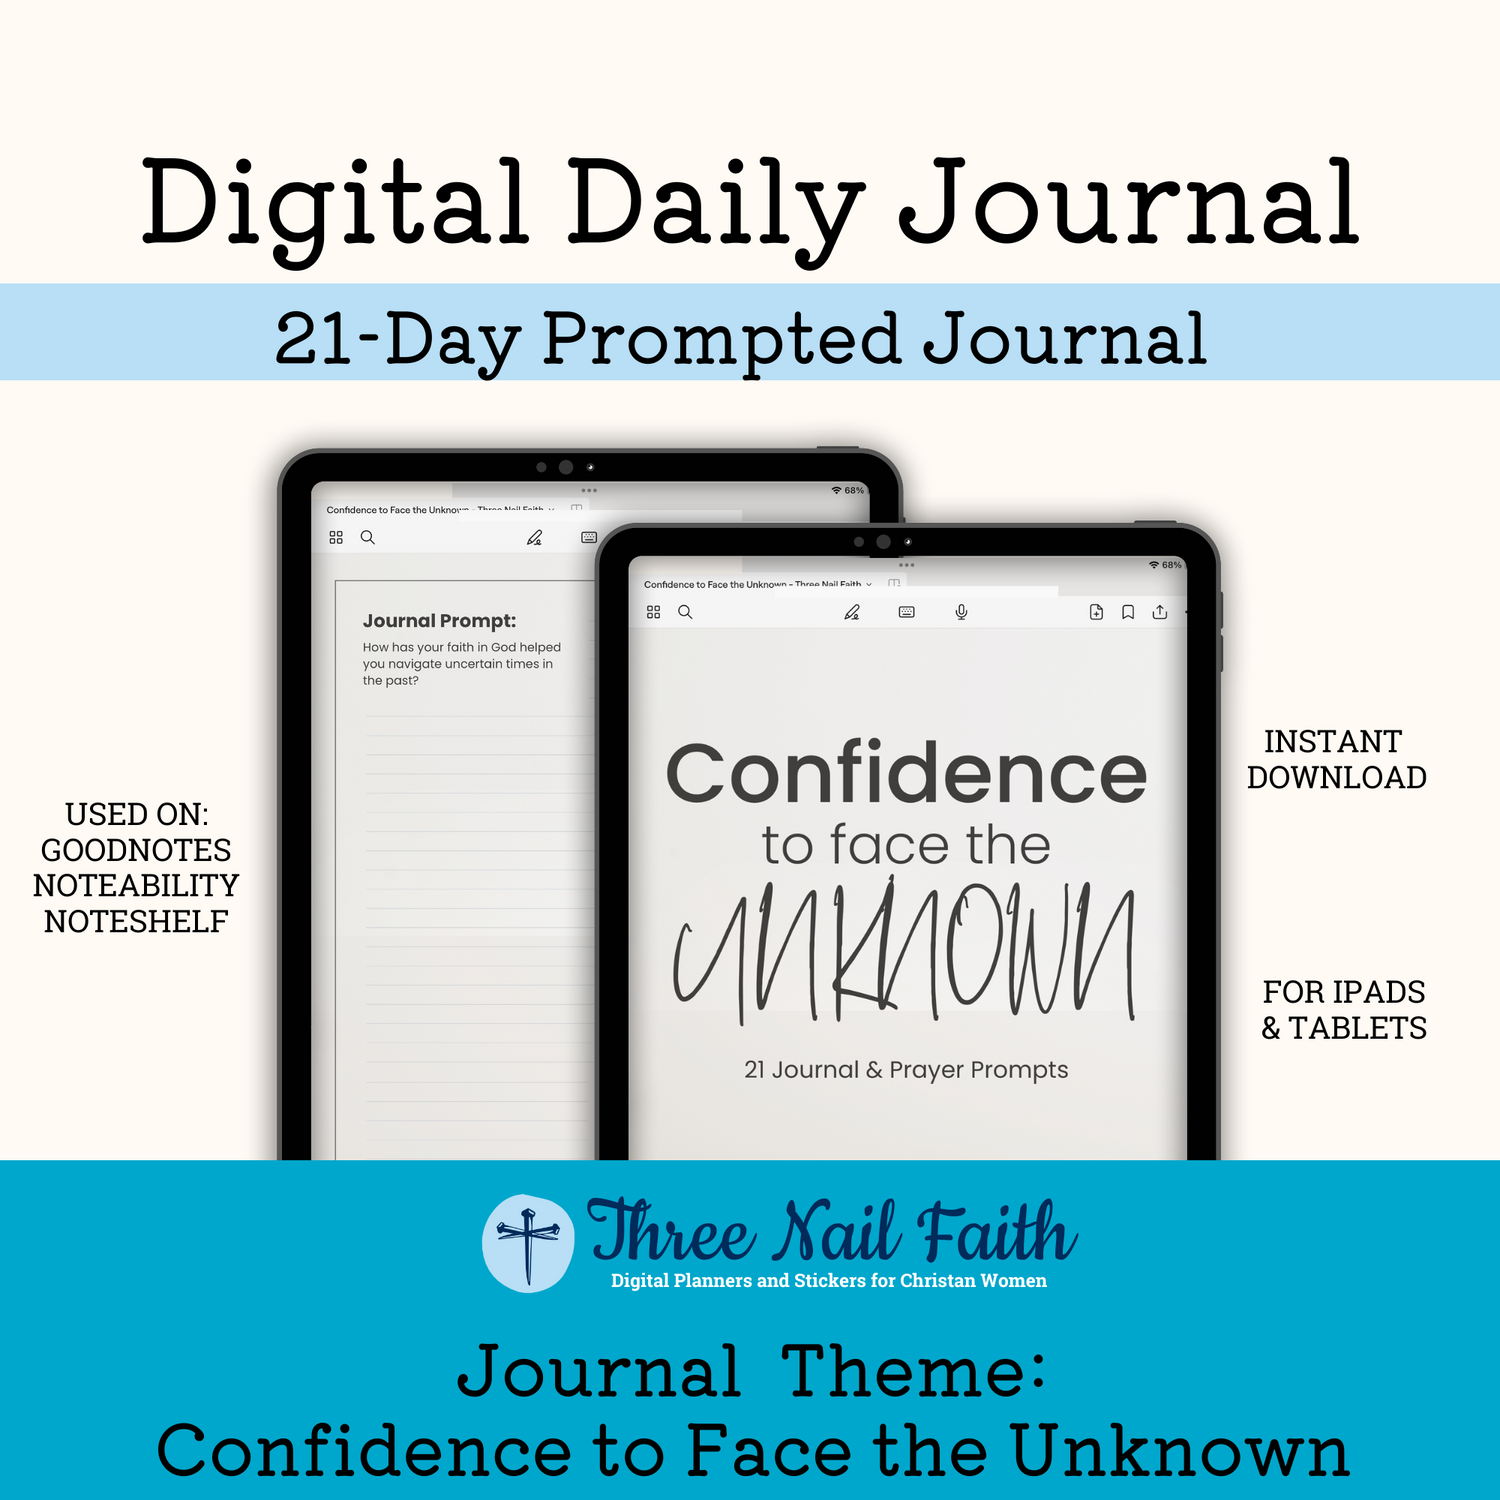 Confidence to face the unknown 21 day prompted faith journal